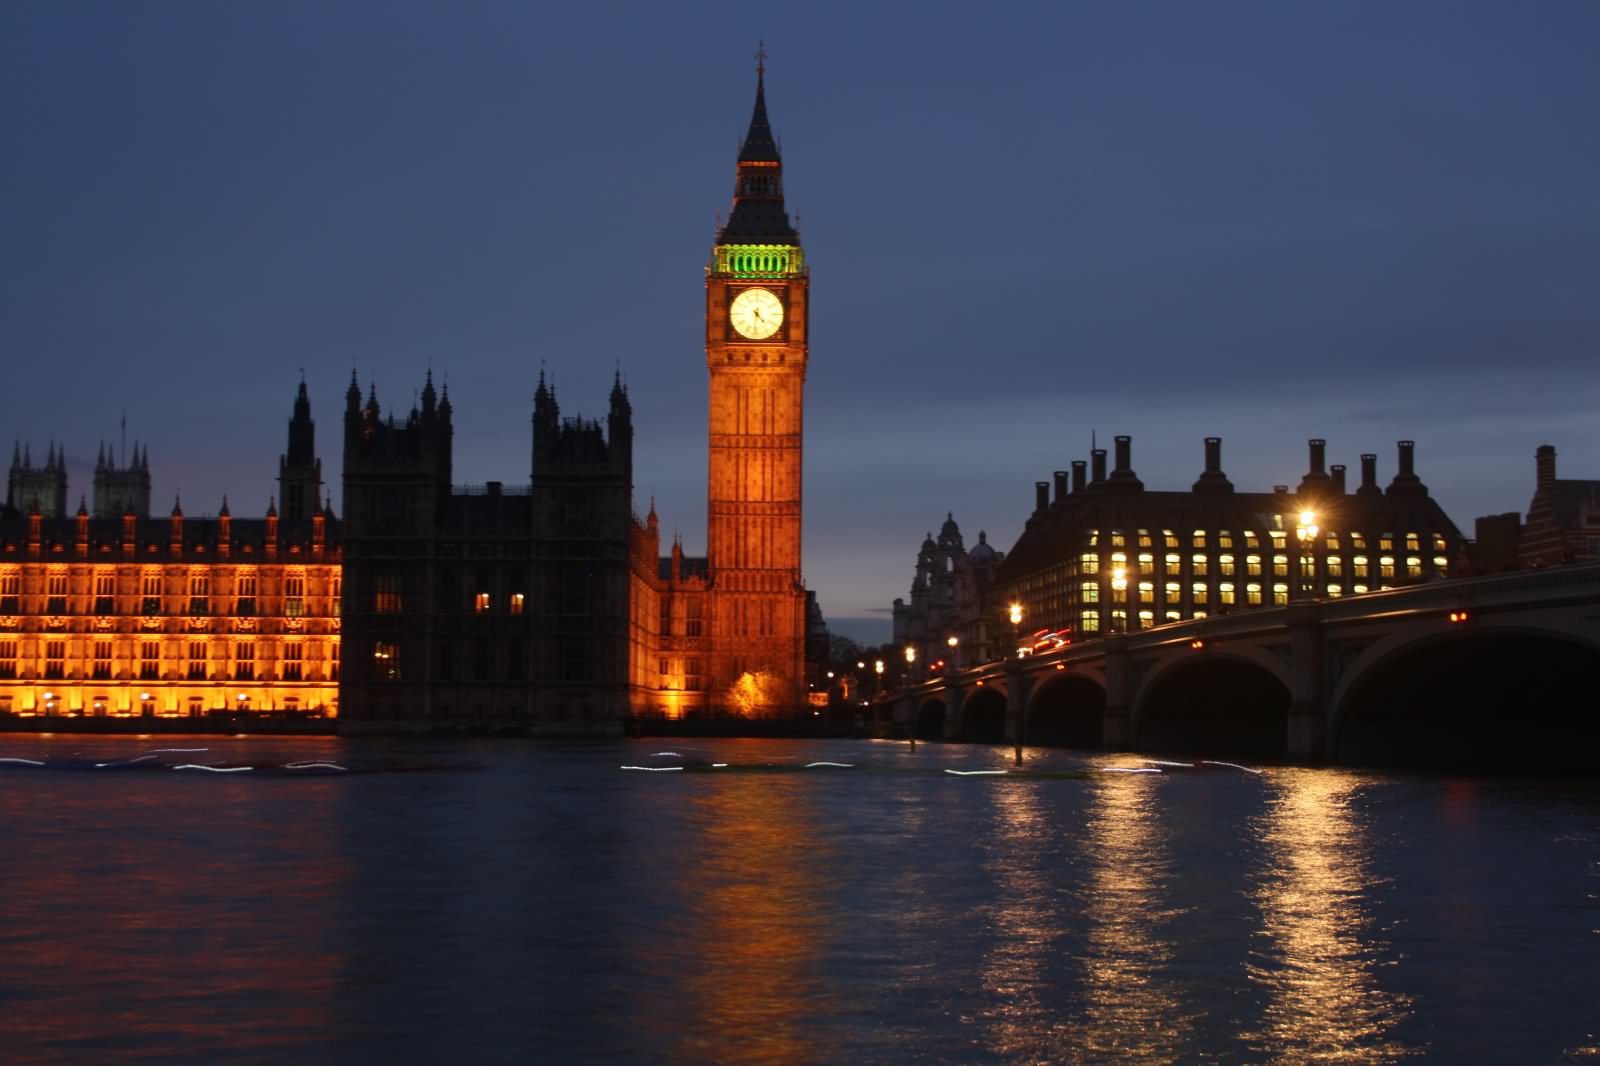 Amazing Night View Of Big Ben Over The River Thames